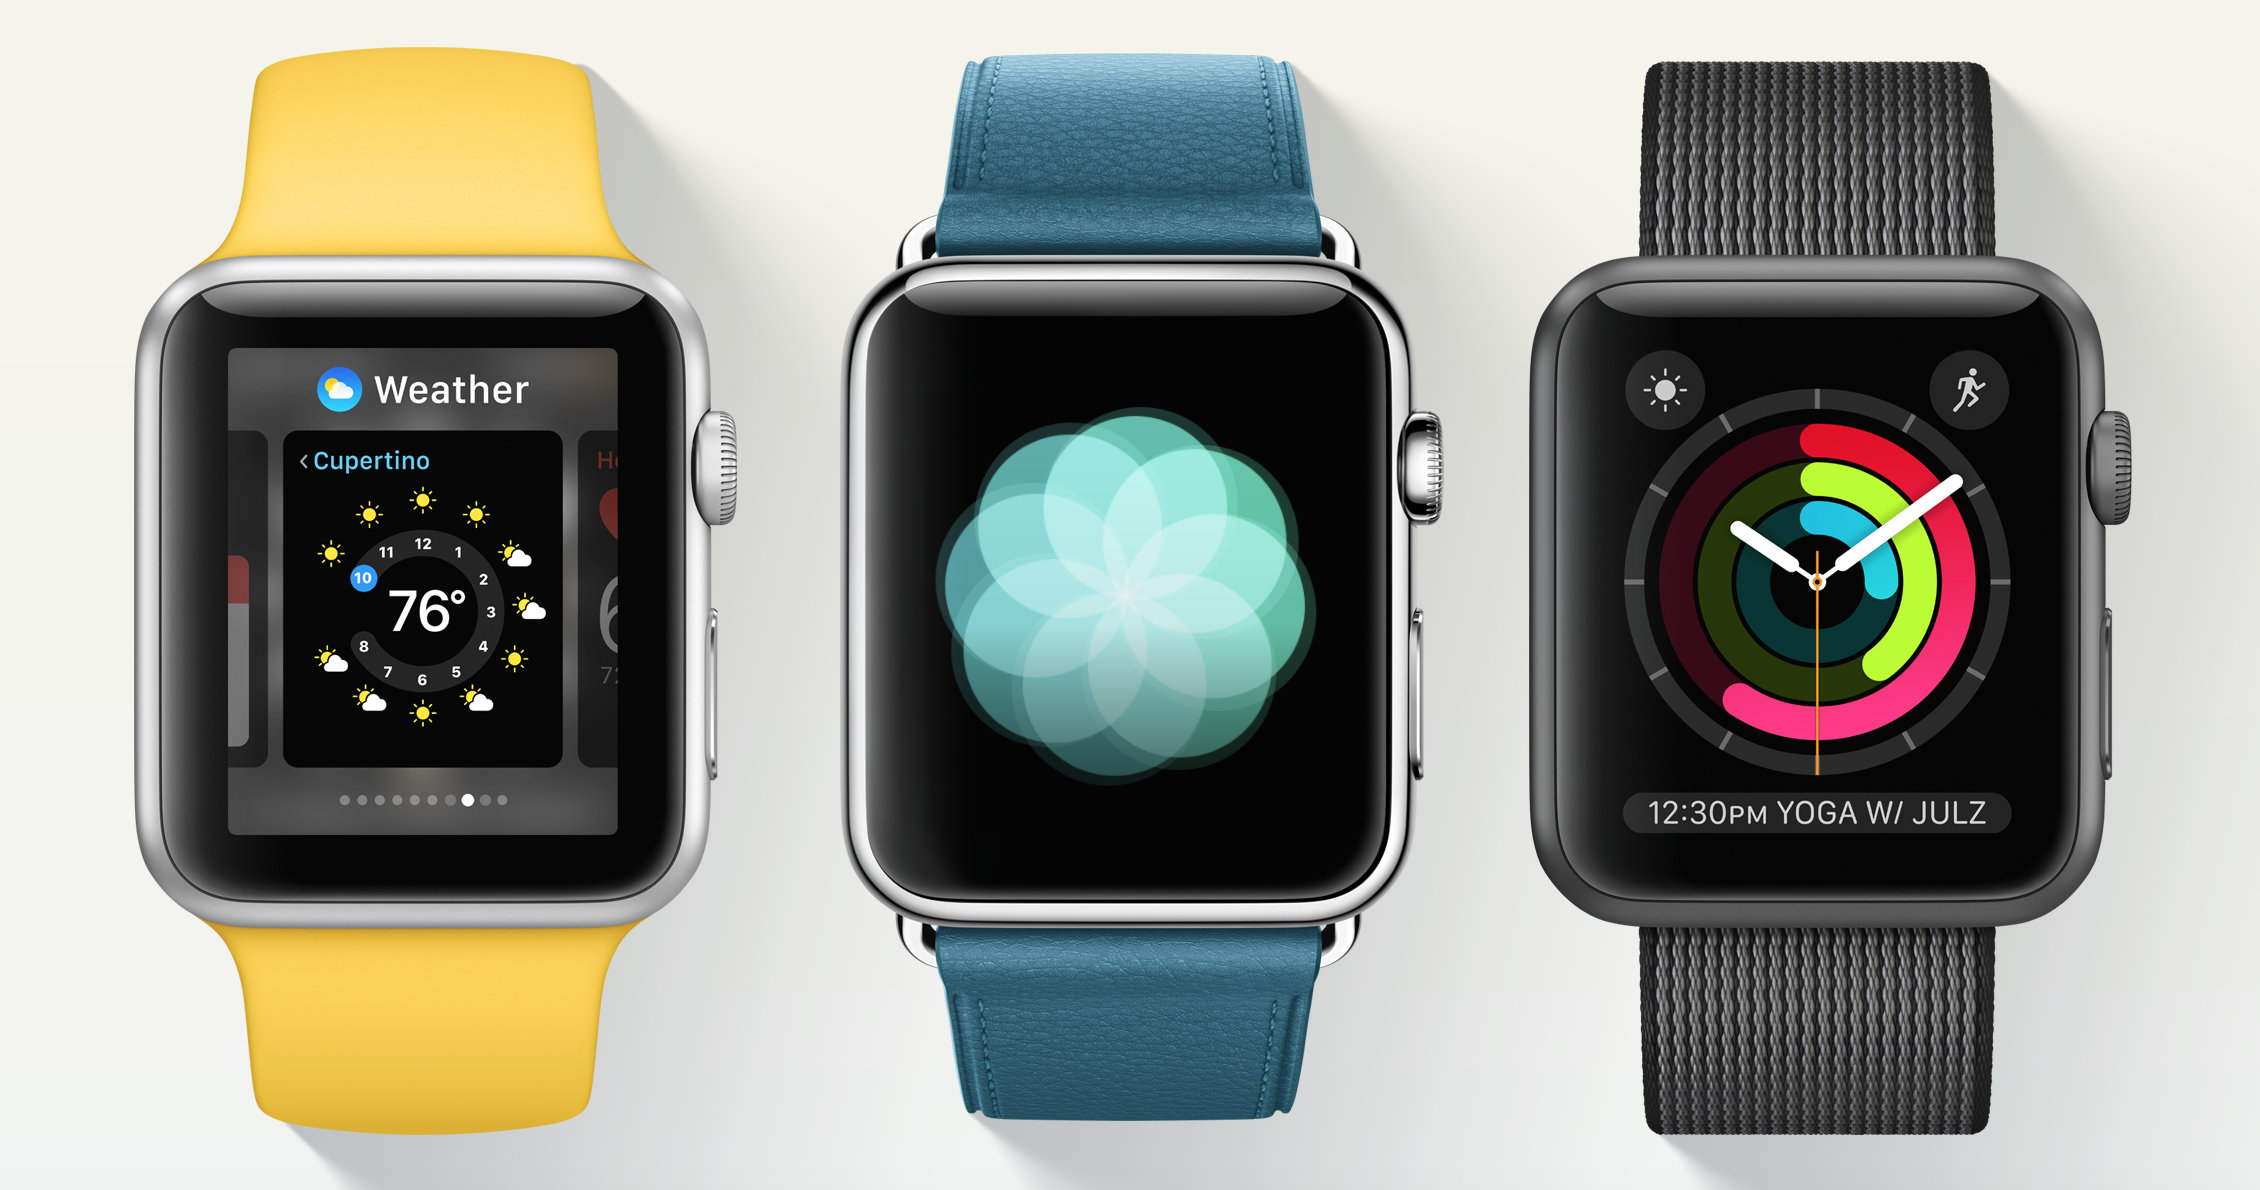 Does watchOS 3 Make the Apple Watch Feel Like a Whole New Watch?